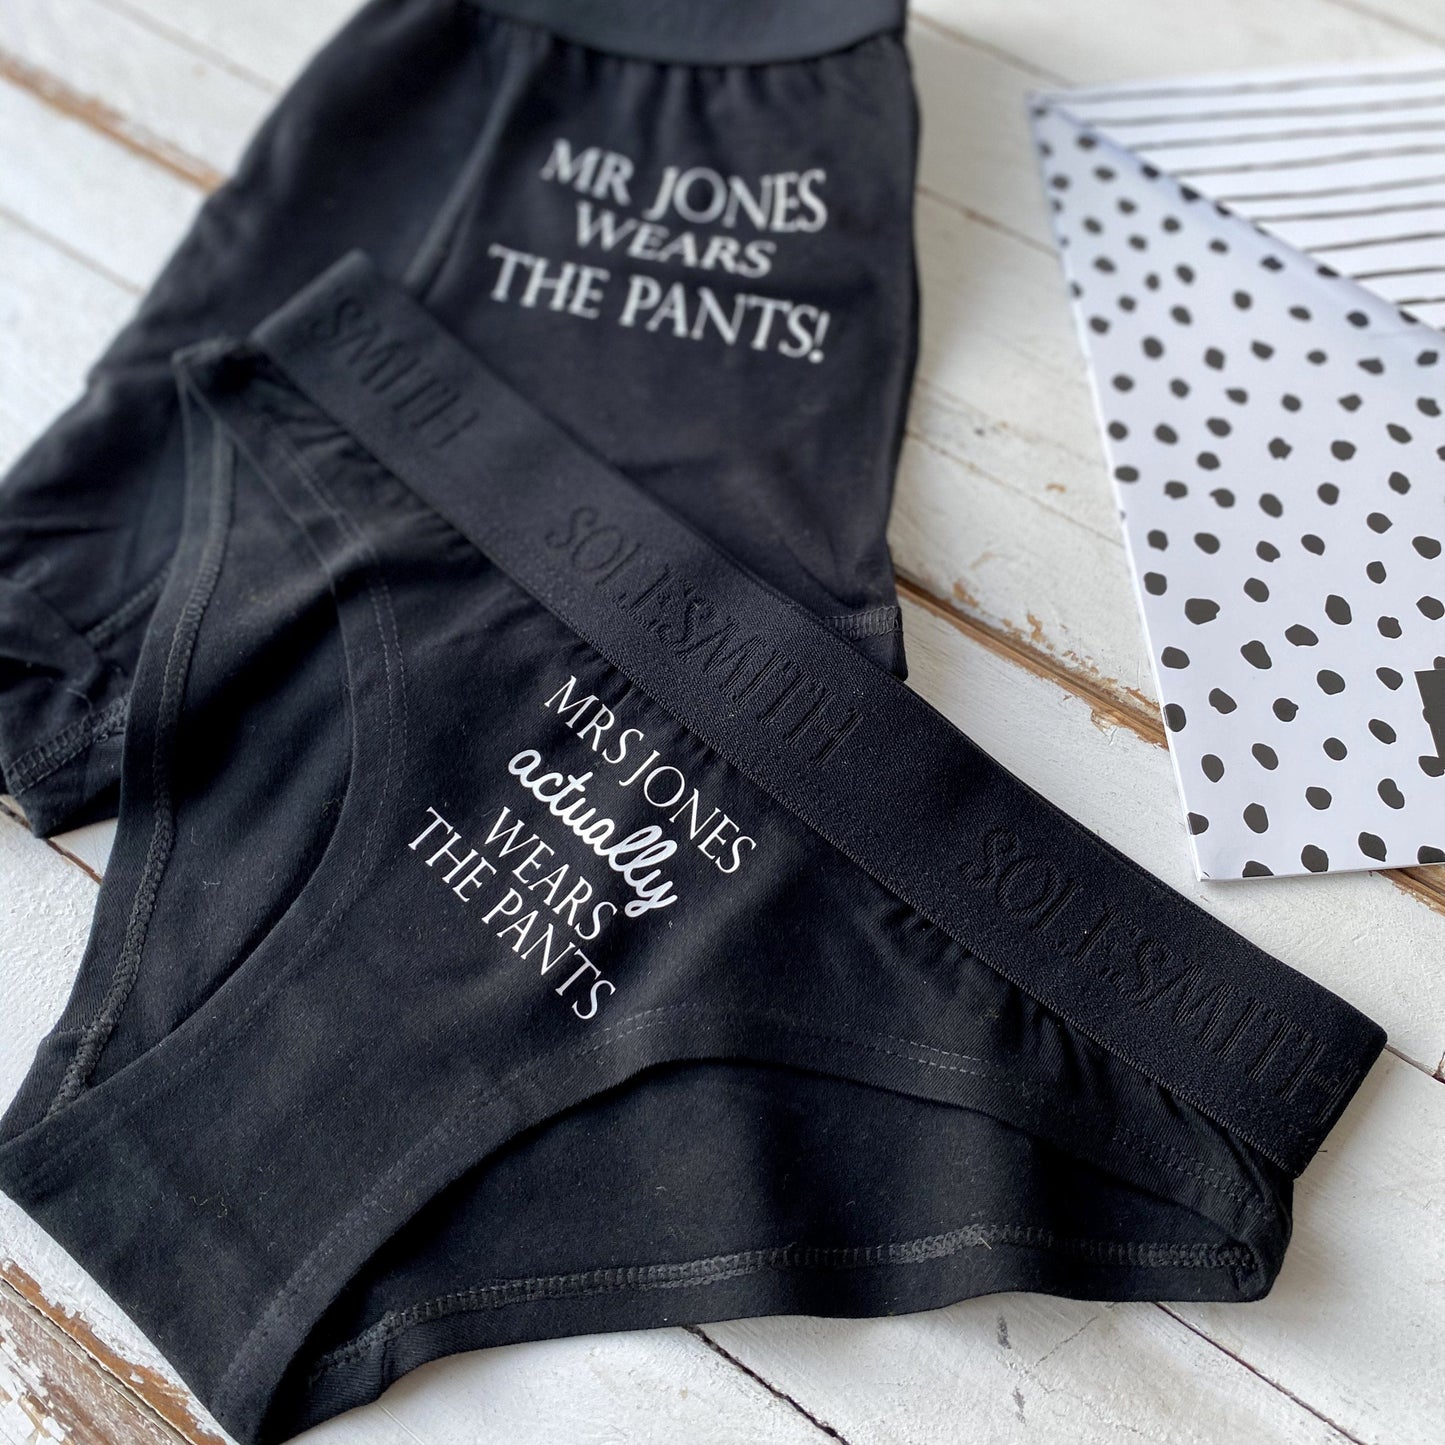 Bottoms Up! Personalised Underwear By Solesmith